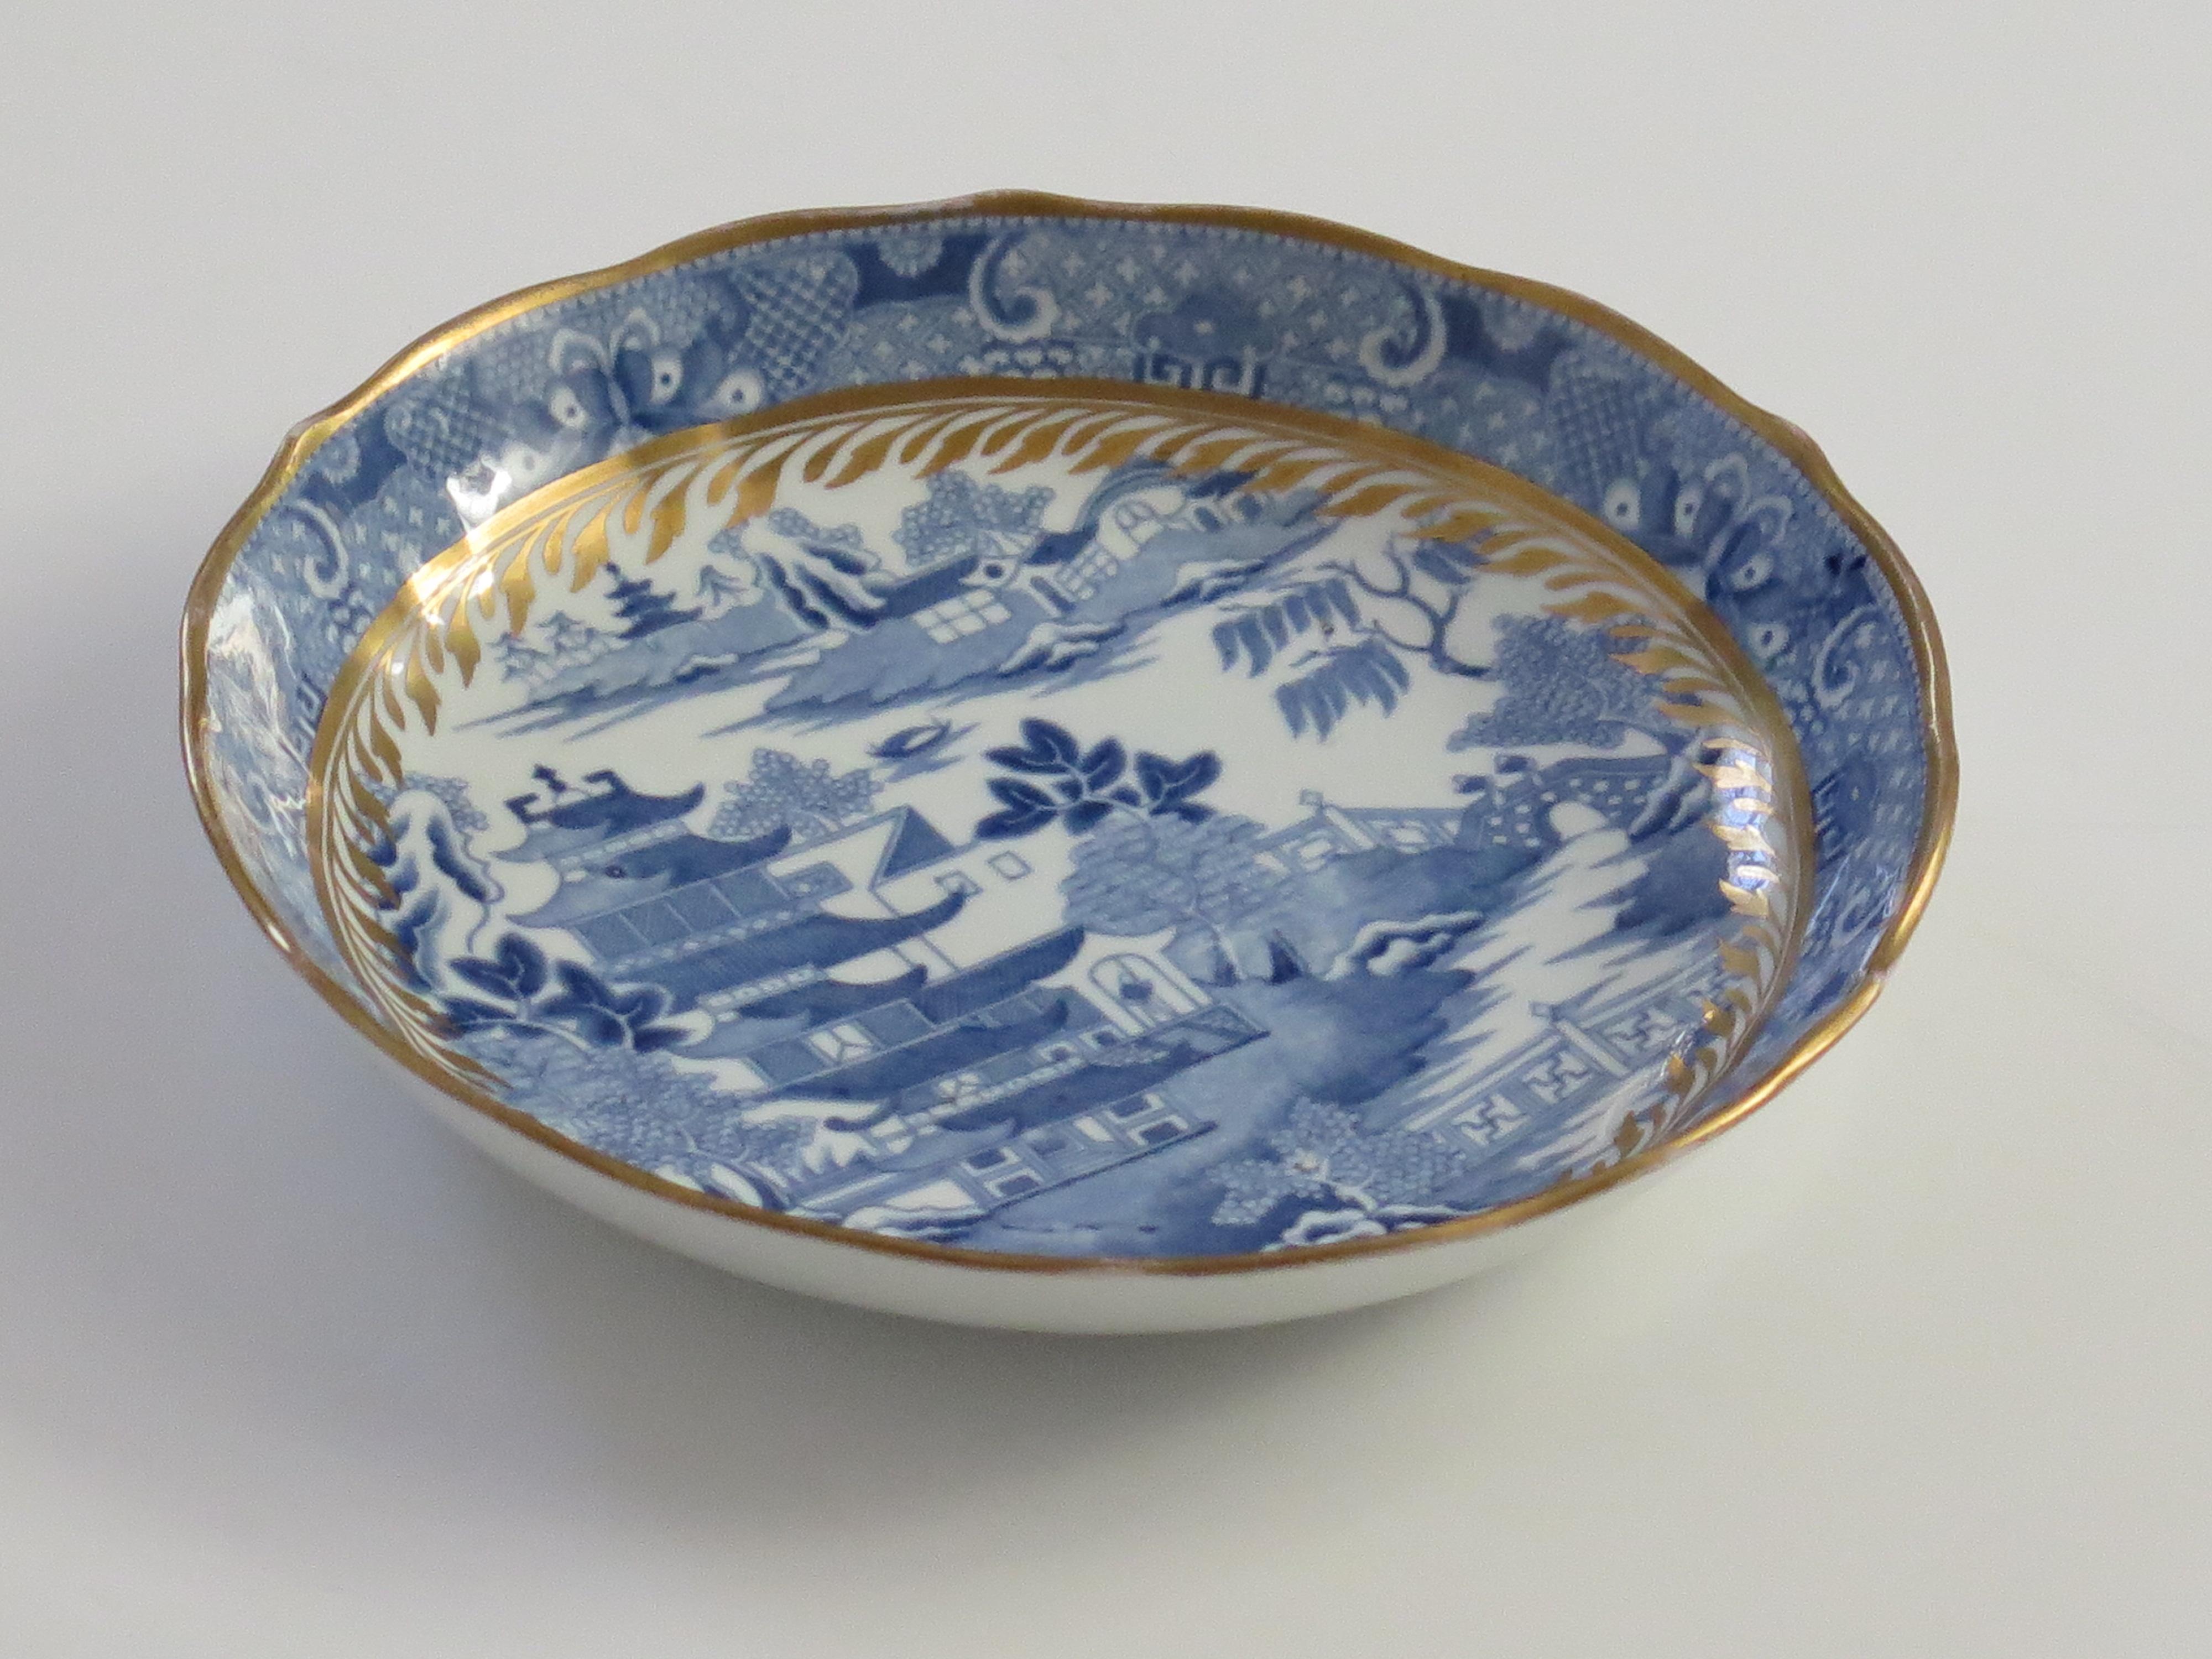 This is a Porcelain blue and white, hand gilded Saucer Dish / Bowl made by Miles Mason (Mason's), Staffordshire Potteries, England around the turn of the 18th century, circa 1805. 

The dish is well potted on a low foot with slightly fluted sides